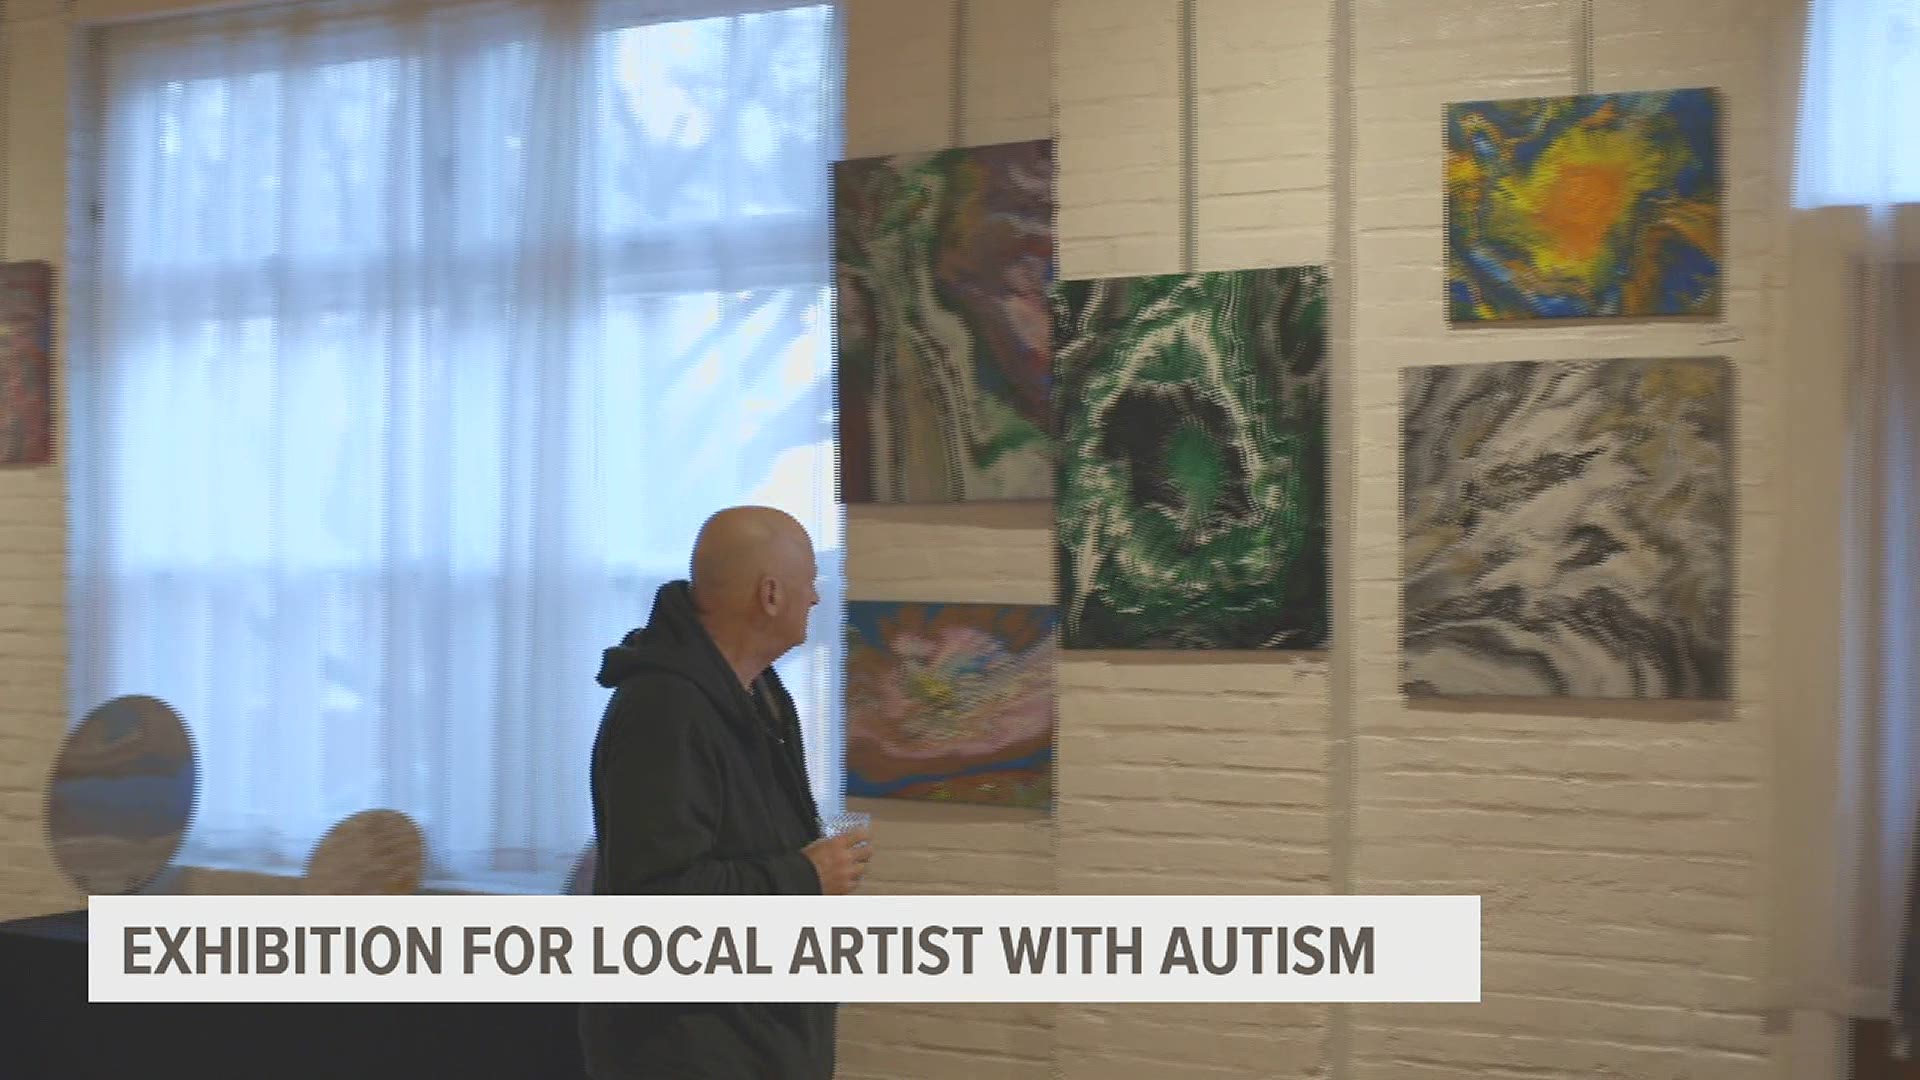 You can view the display all throughout the month. April is Autism Awareness Month and he is ready to share his work during this important time.